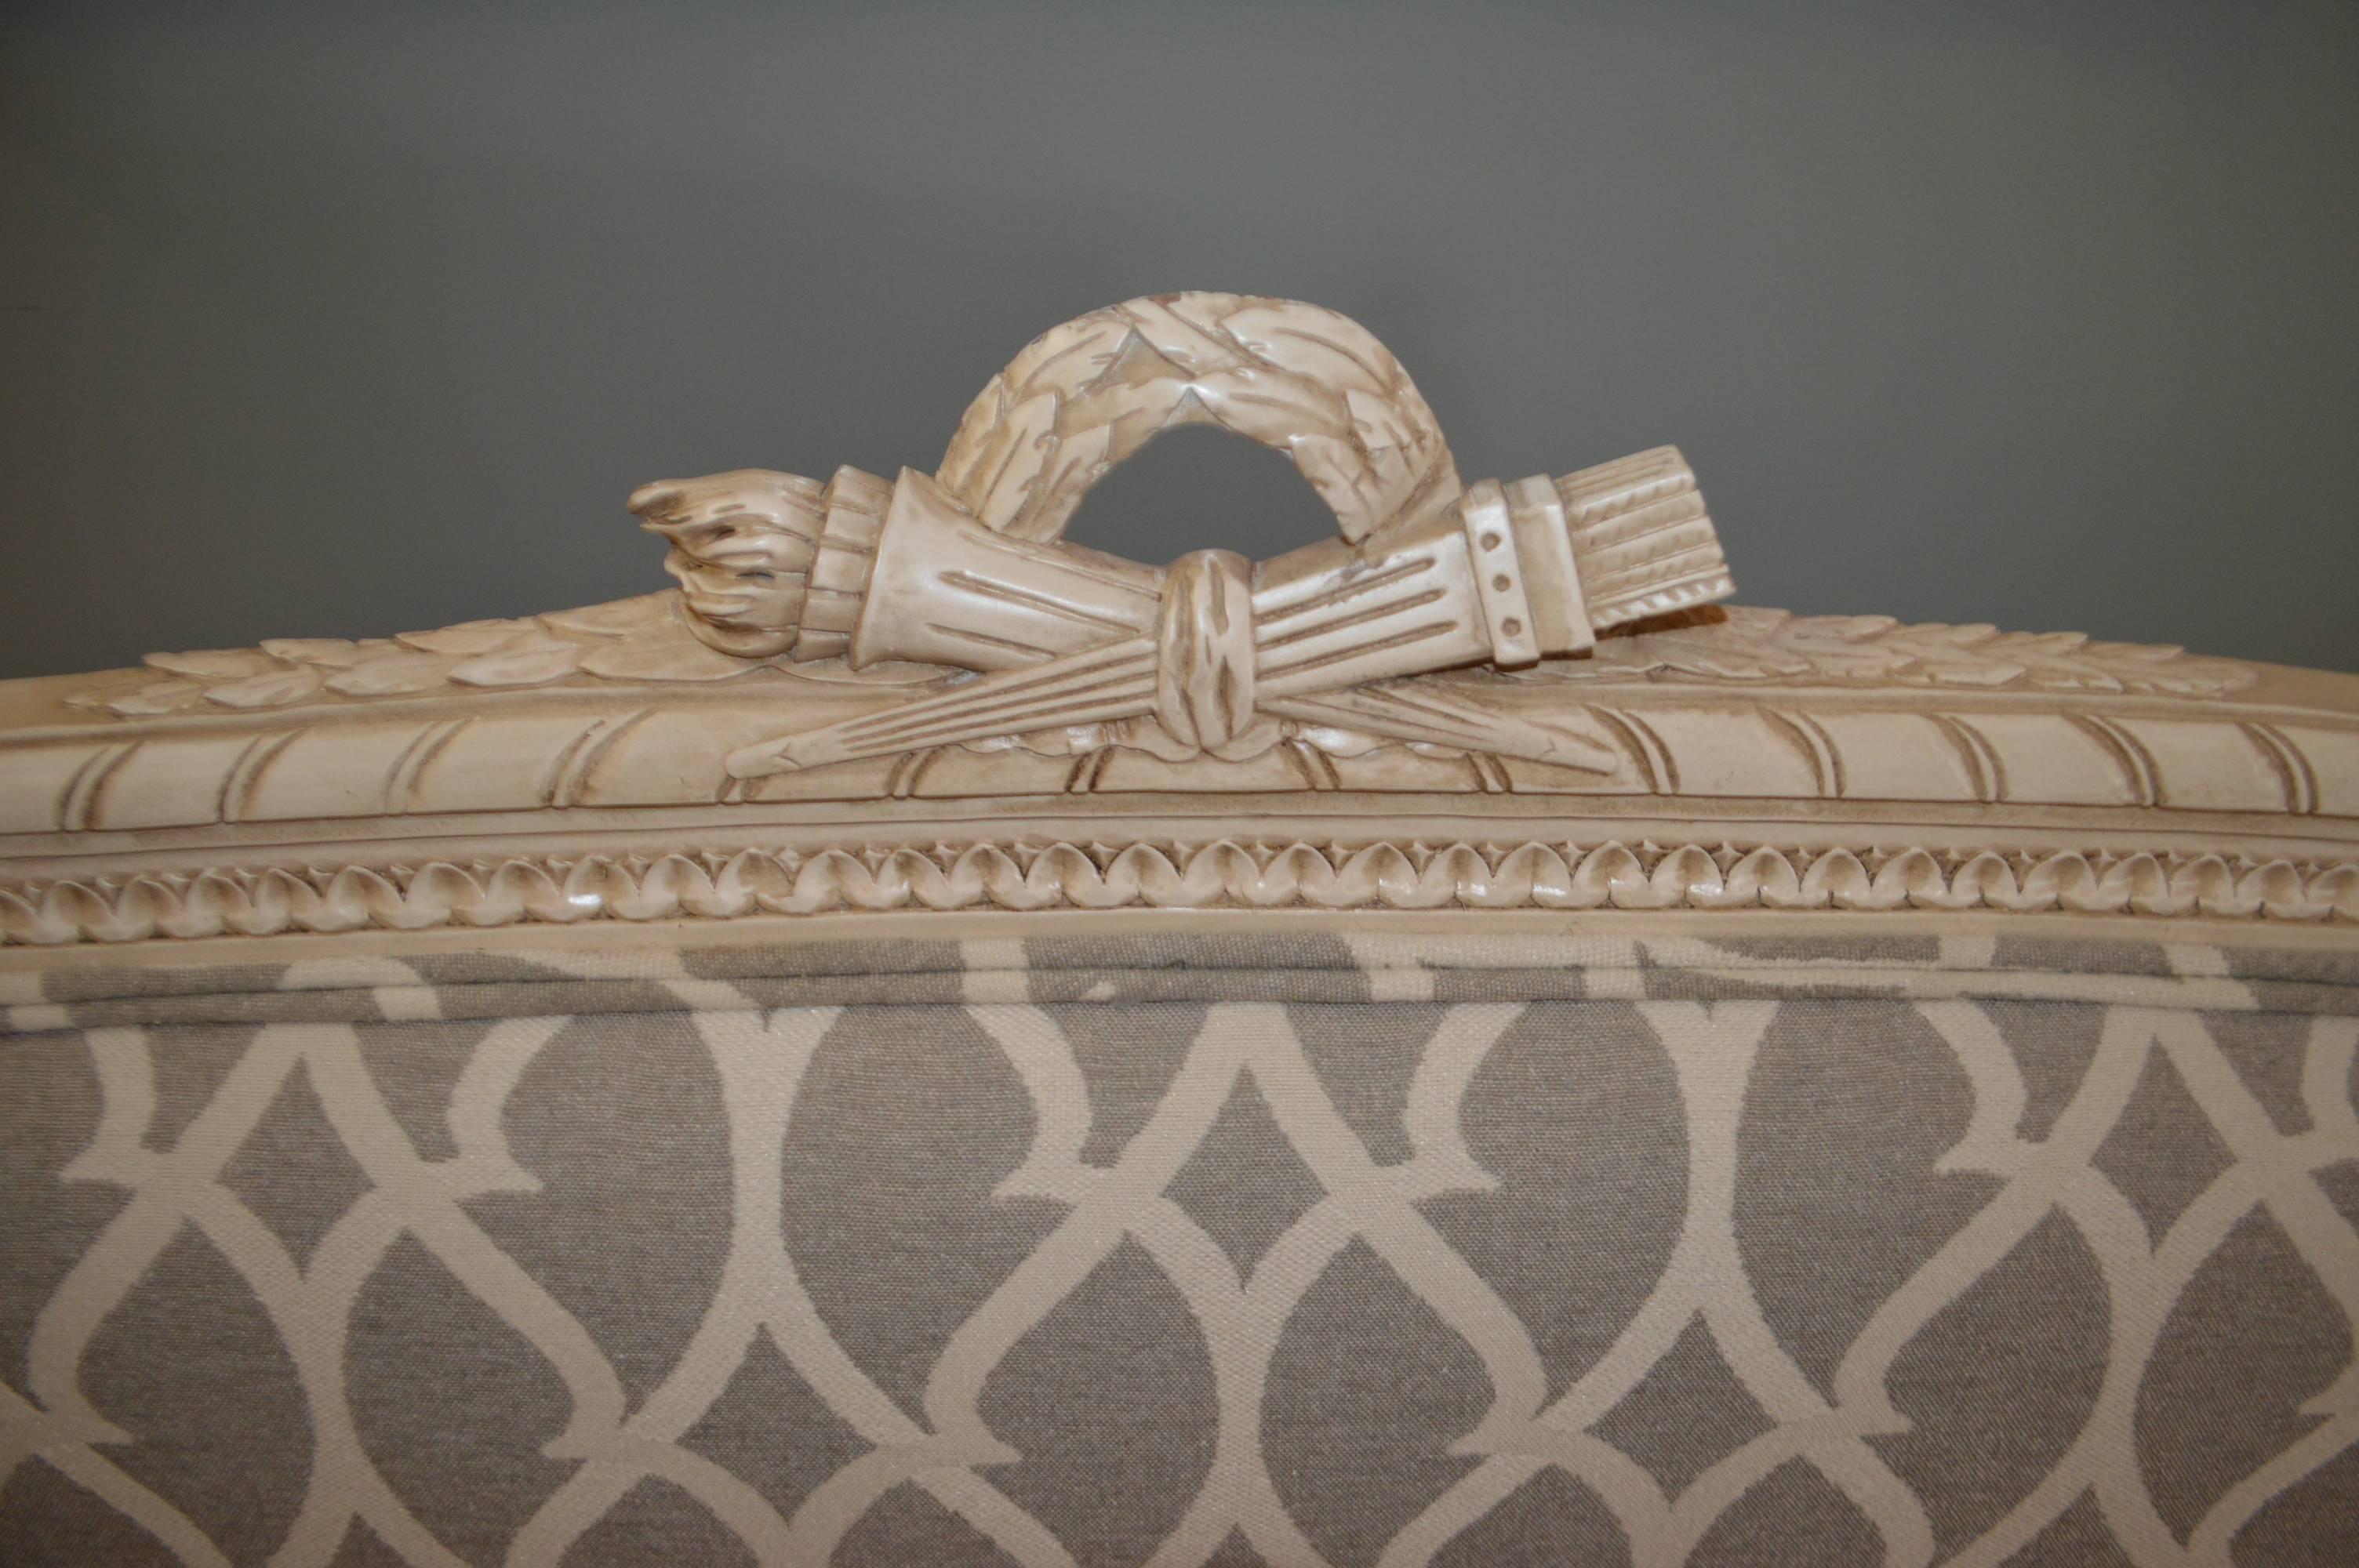 19th century Louis XVI style canapé frame newly painted and upholstered in a grey and cream print weave fabric. Upholstered with new springs and feather top and foam seat cushion. Very comfortable and highly decorative.